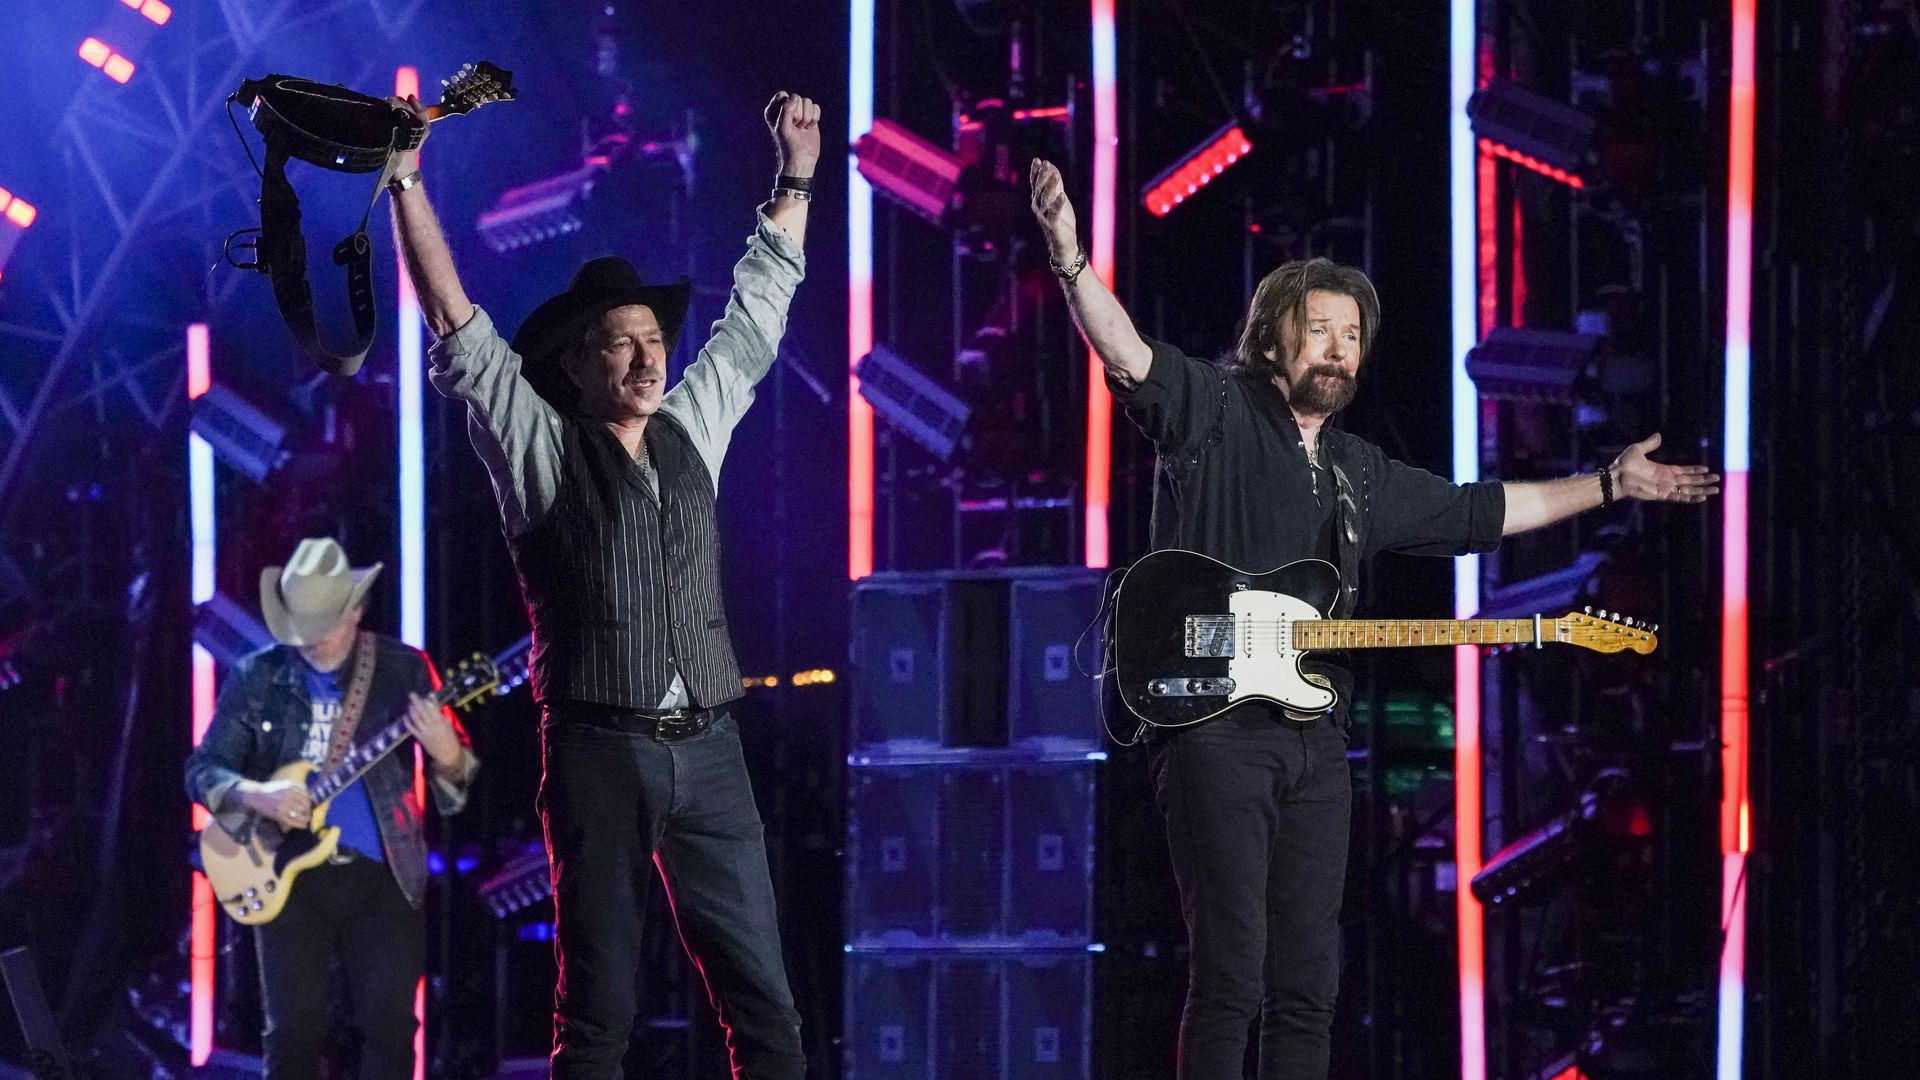 Brooks and Dunn celebrate after performing a song on stage